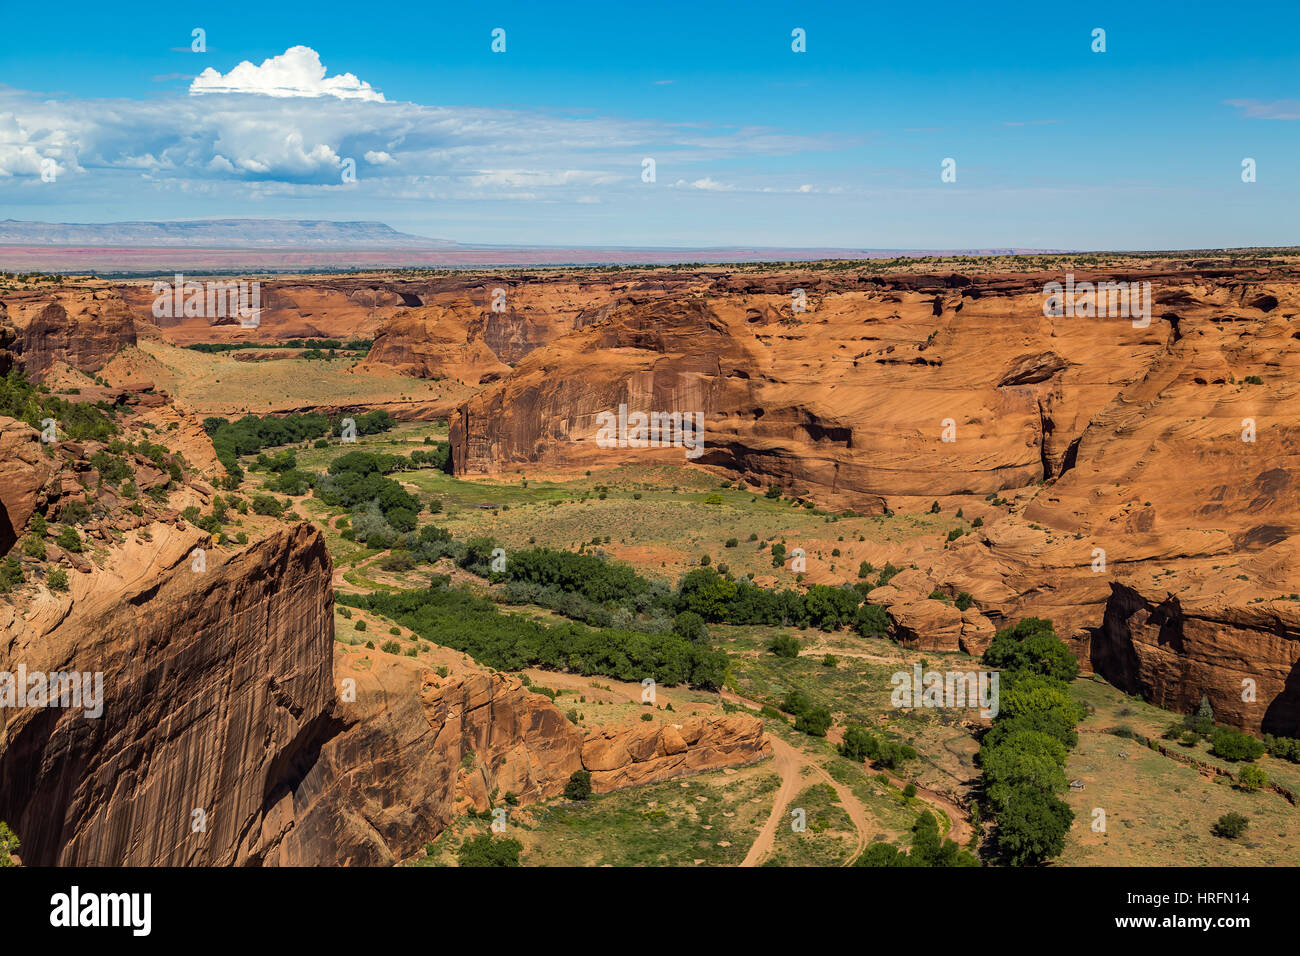 The Canyon de Chelly National Monument consists of many well-preserved Anasazi ruins and spectacular sheer red cliffs that rise up to 1000 feet. Stock Photo